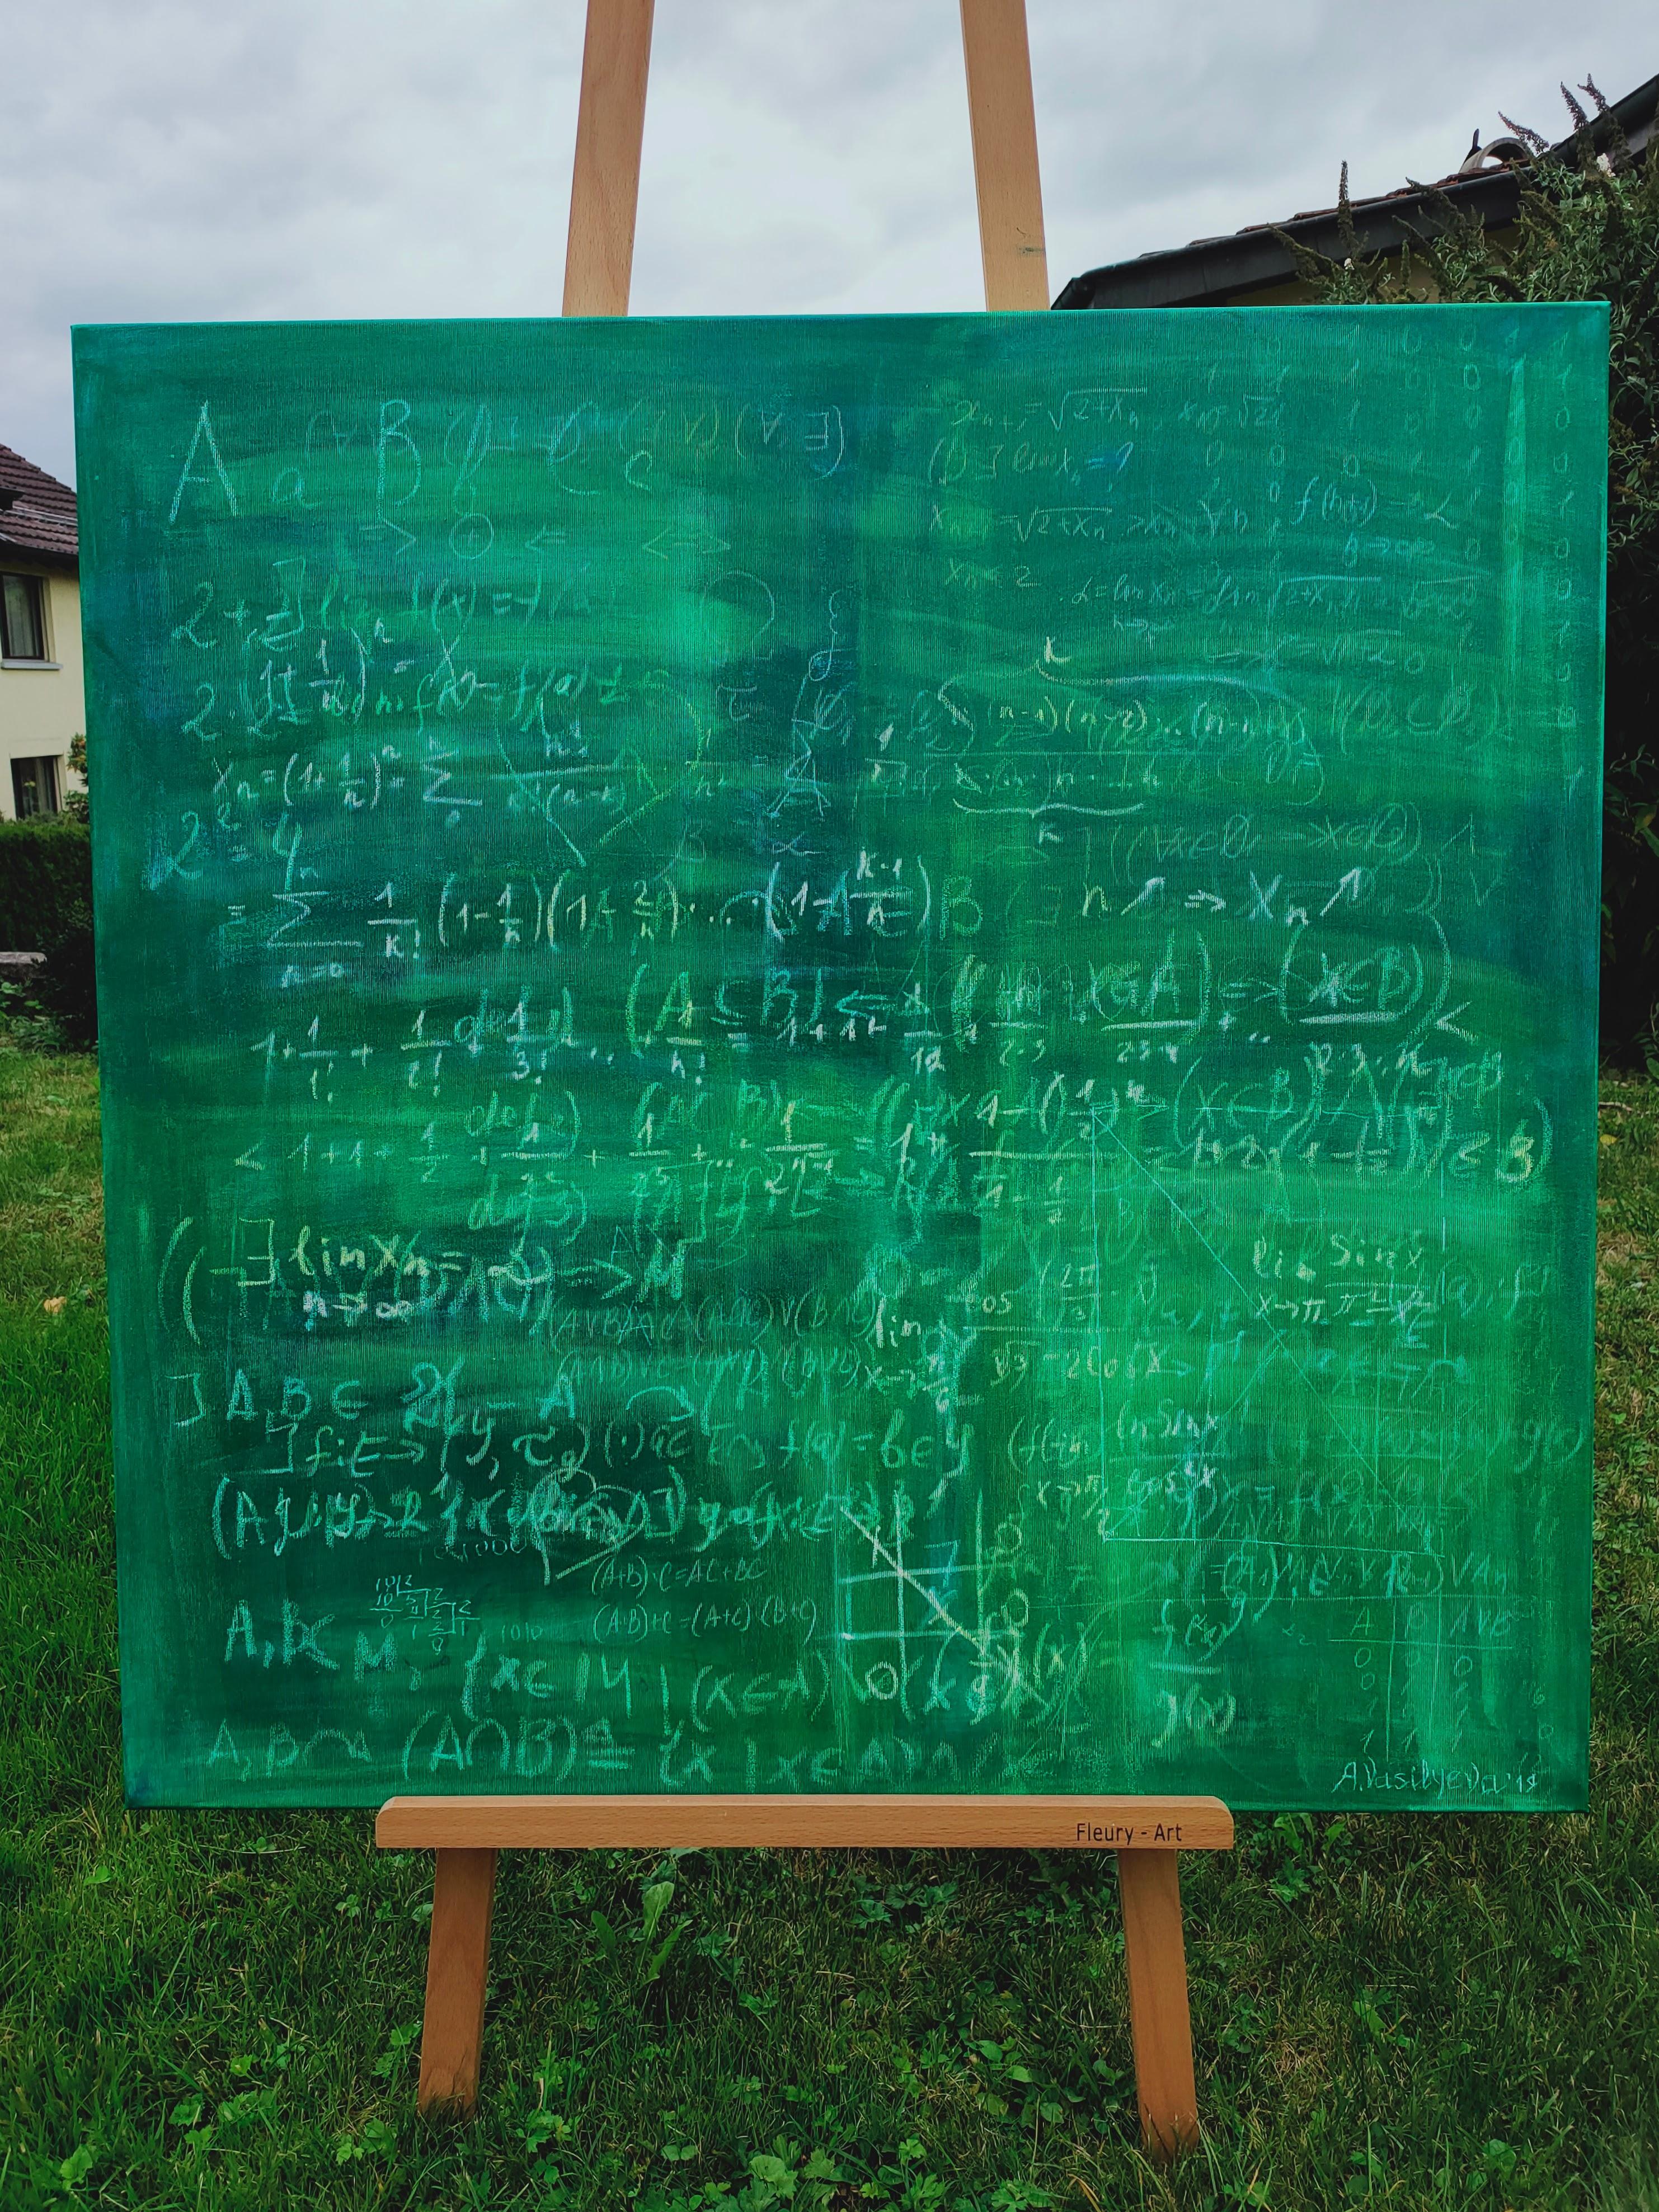 This artwork is painted in the form of a classical school board with math equations. It is a part of the Science Art Collection by Anastasia Vasilyeva.
The paintings size is 100x100x1,8cm. 

